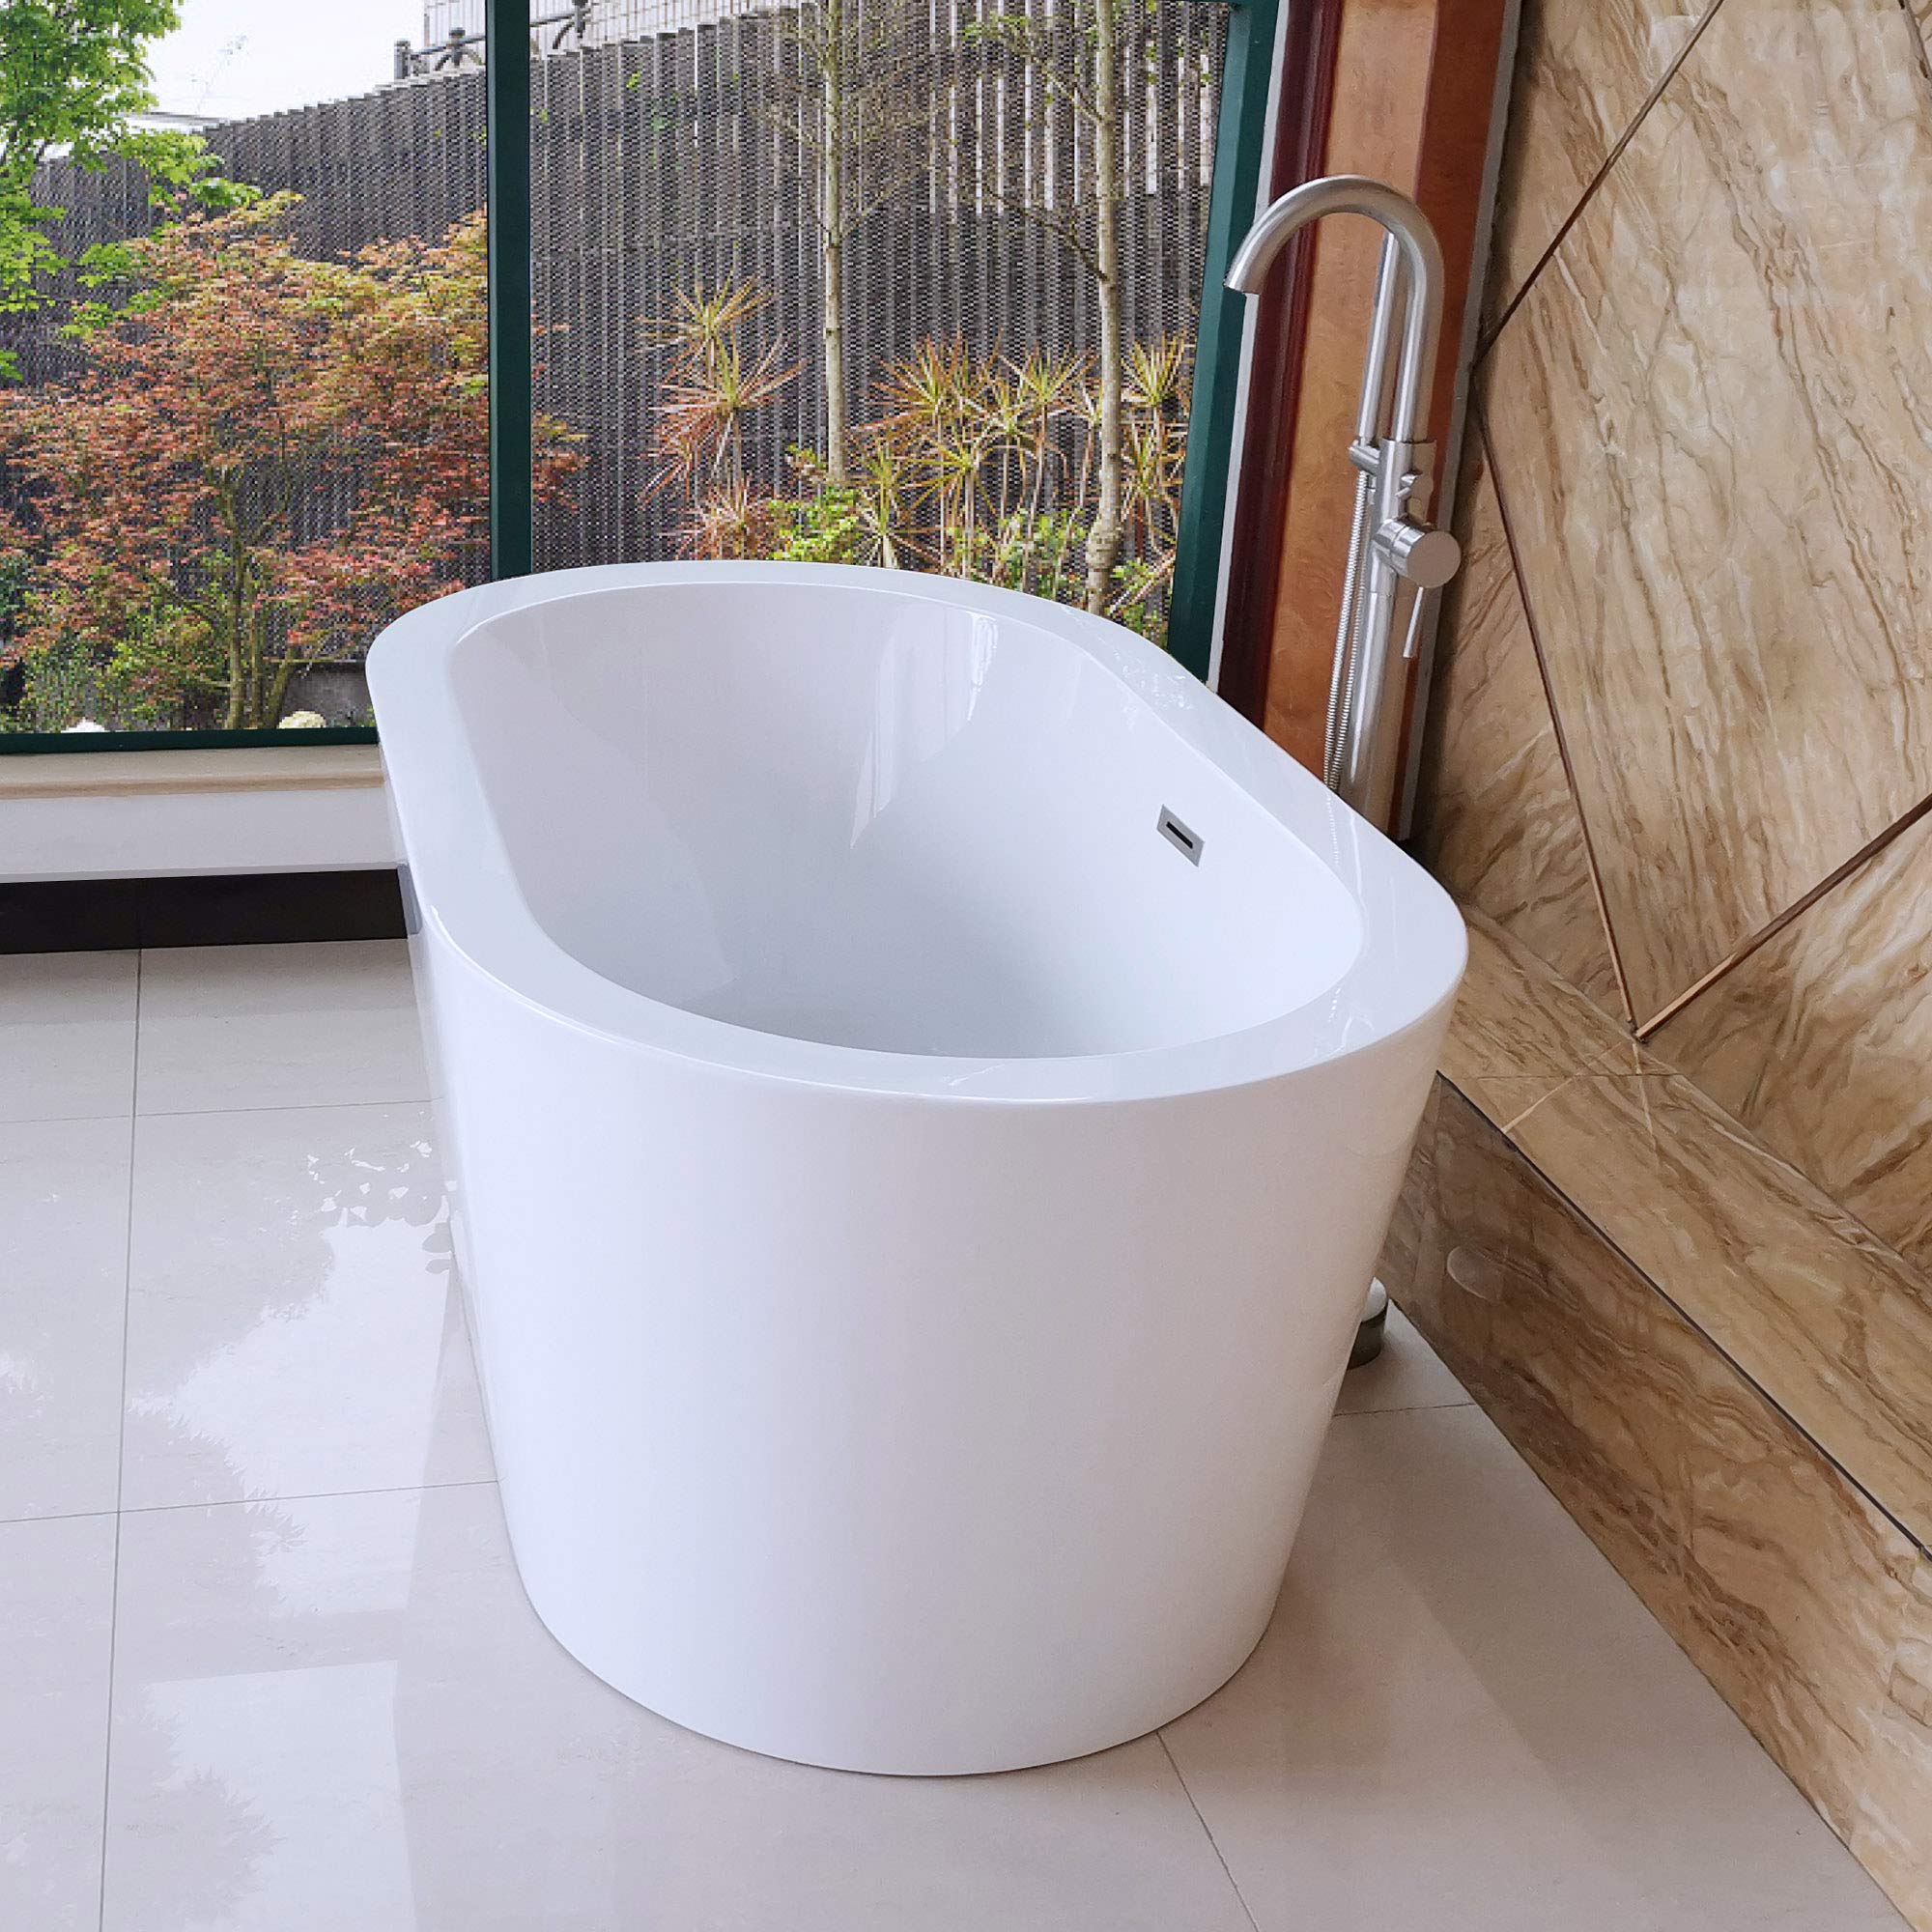 Tubs For Small Bathrooms - BEST HOME DESIGN IDEAS